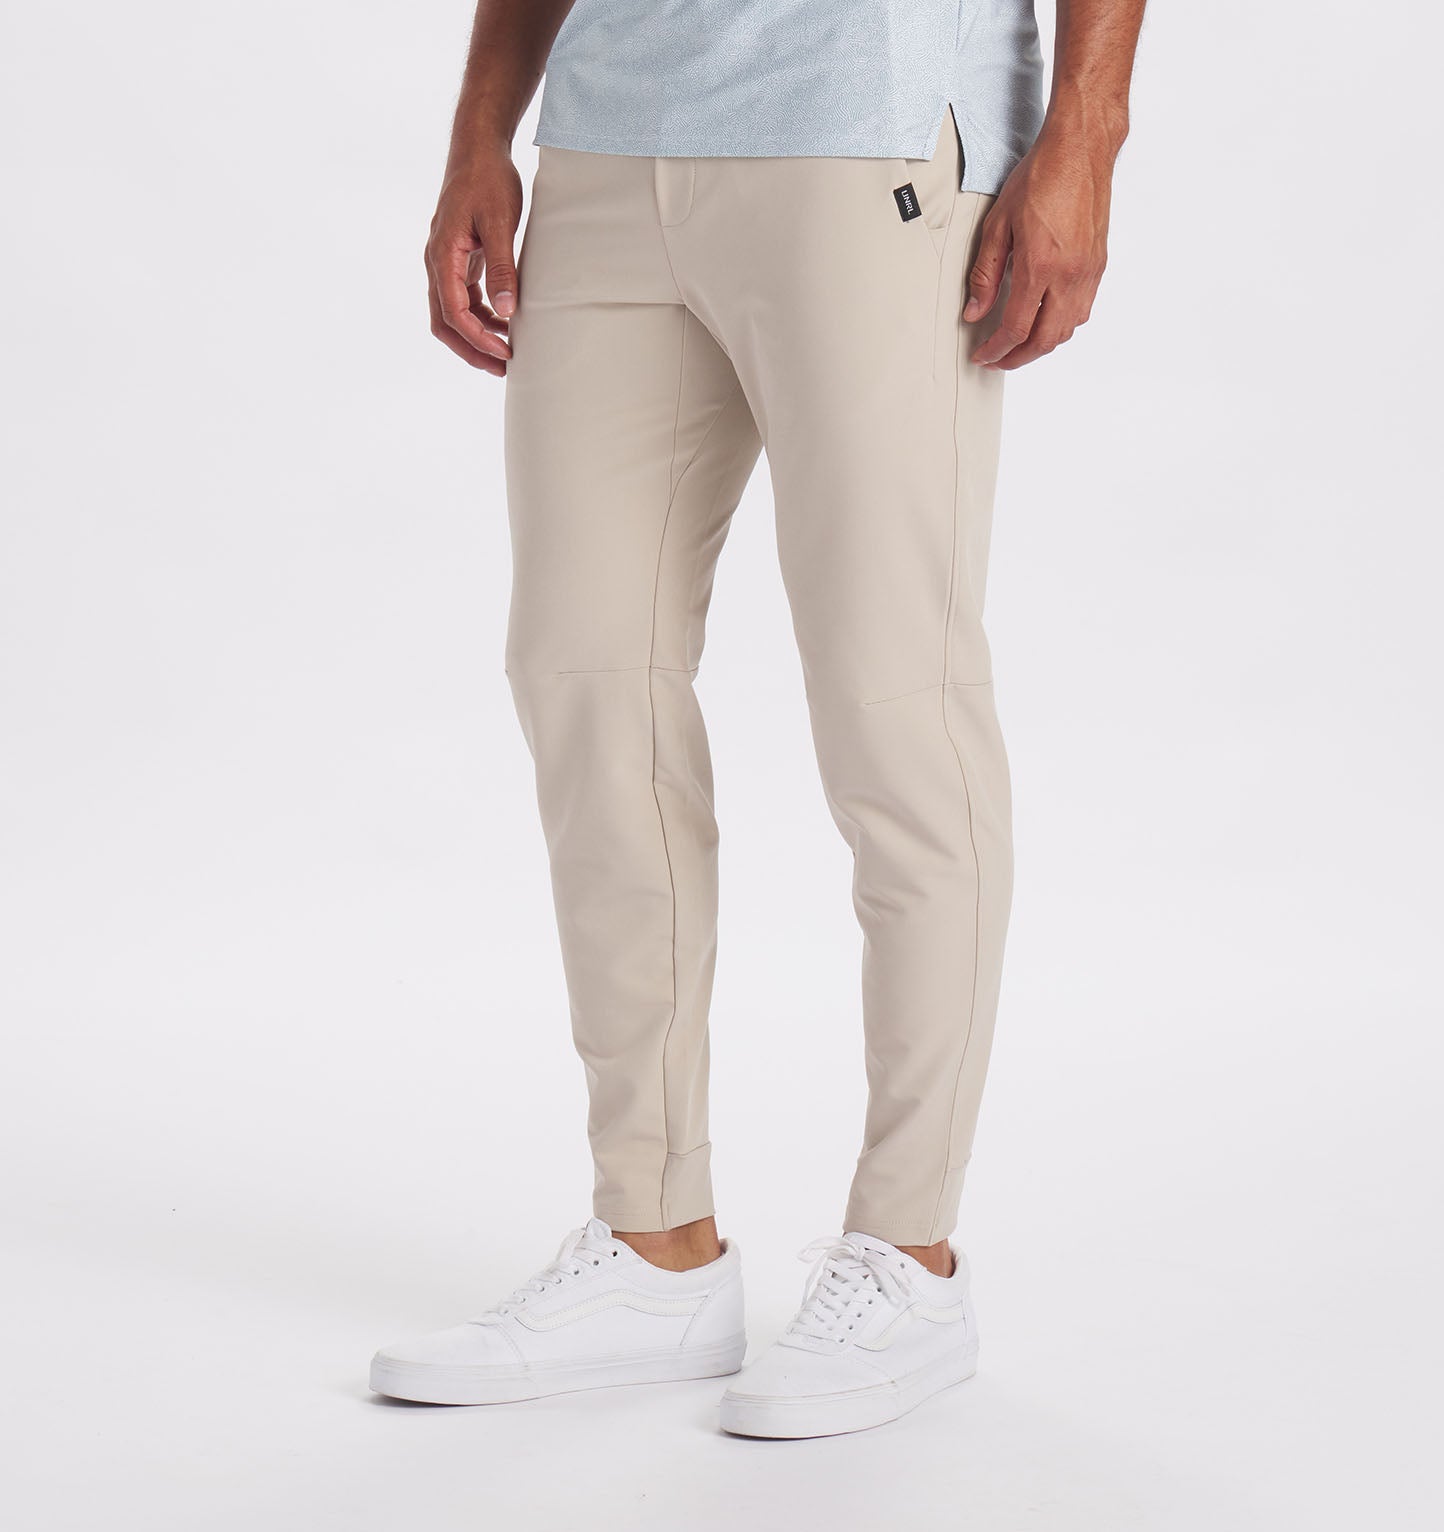 Stilches Quality Menswear Brand | Up to 50% OFF | FREE shipping from 59